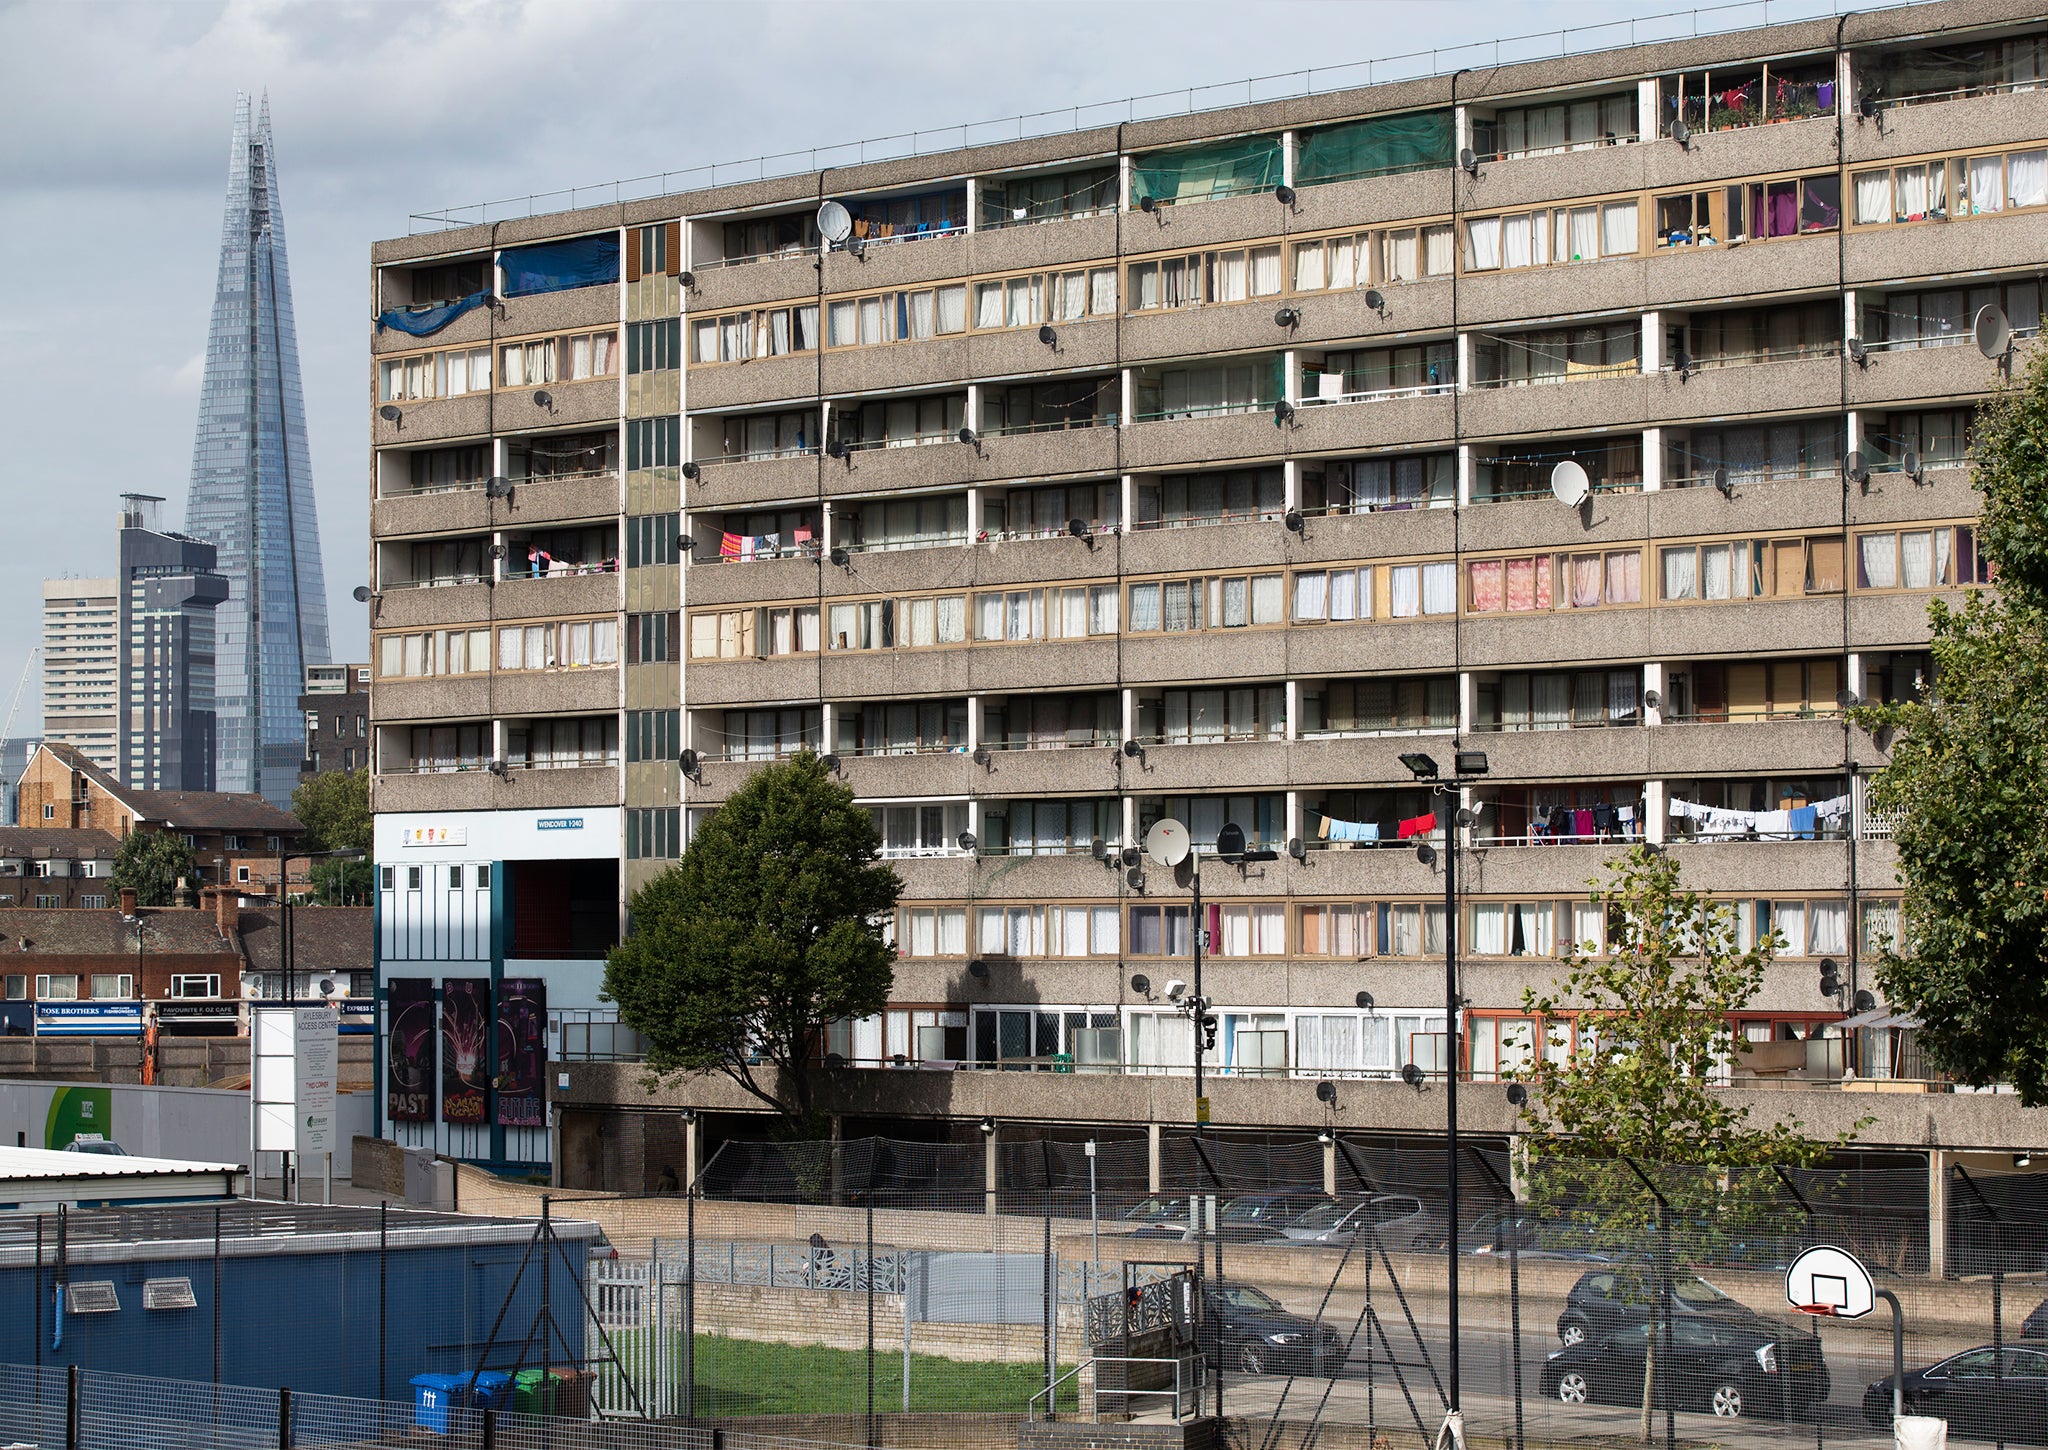 A residential tower block in an area of Southwark with a high concentration of social housing